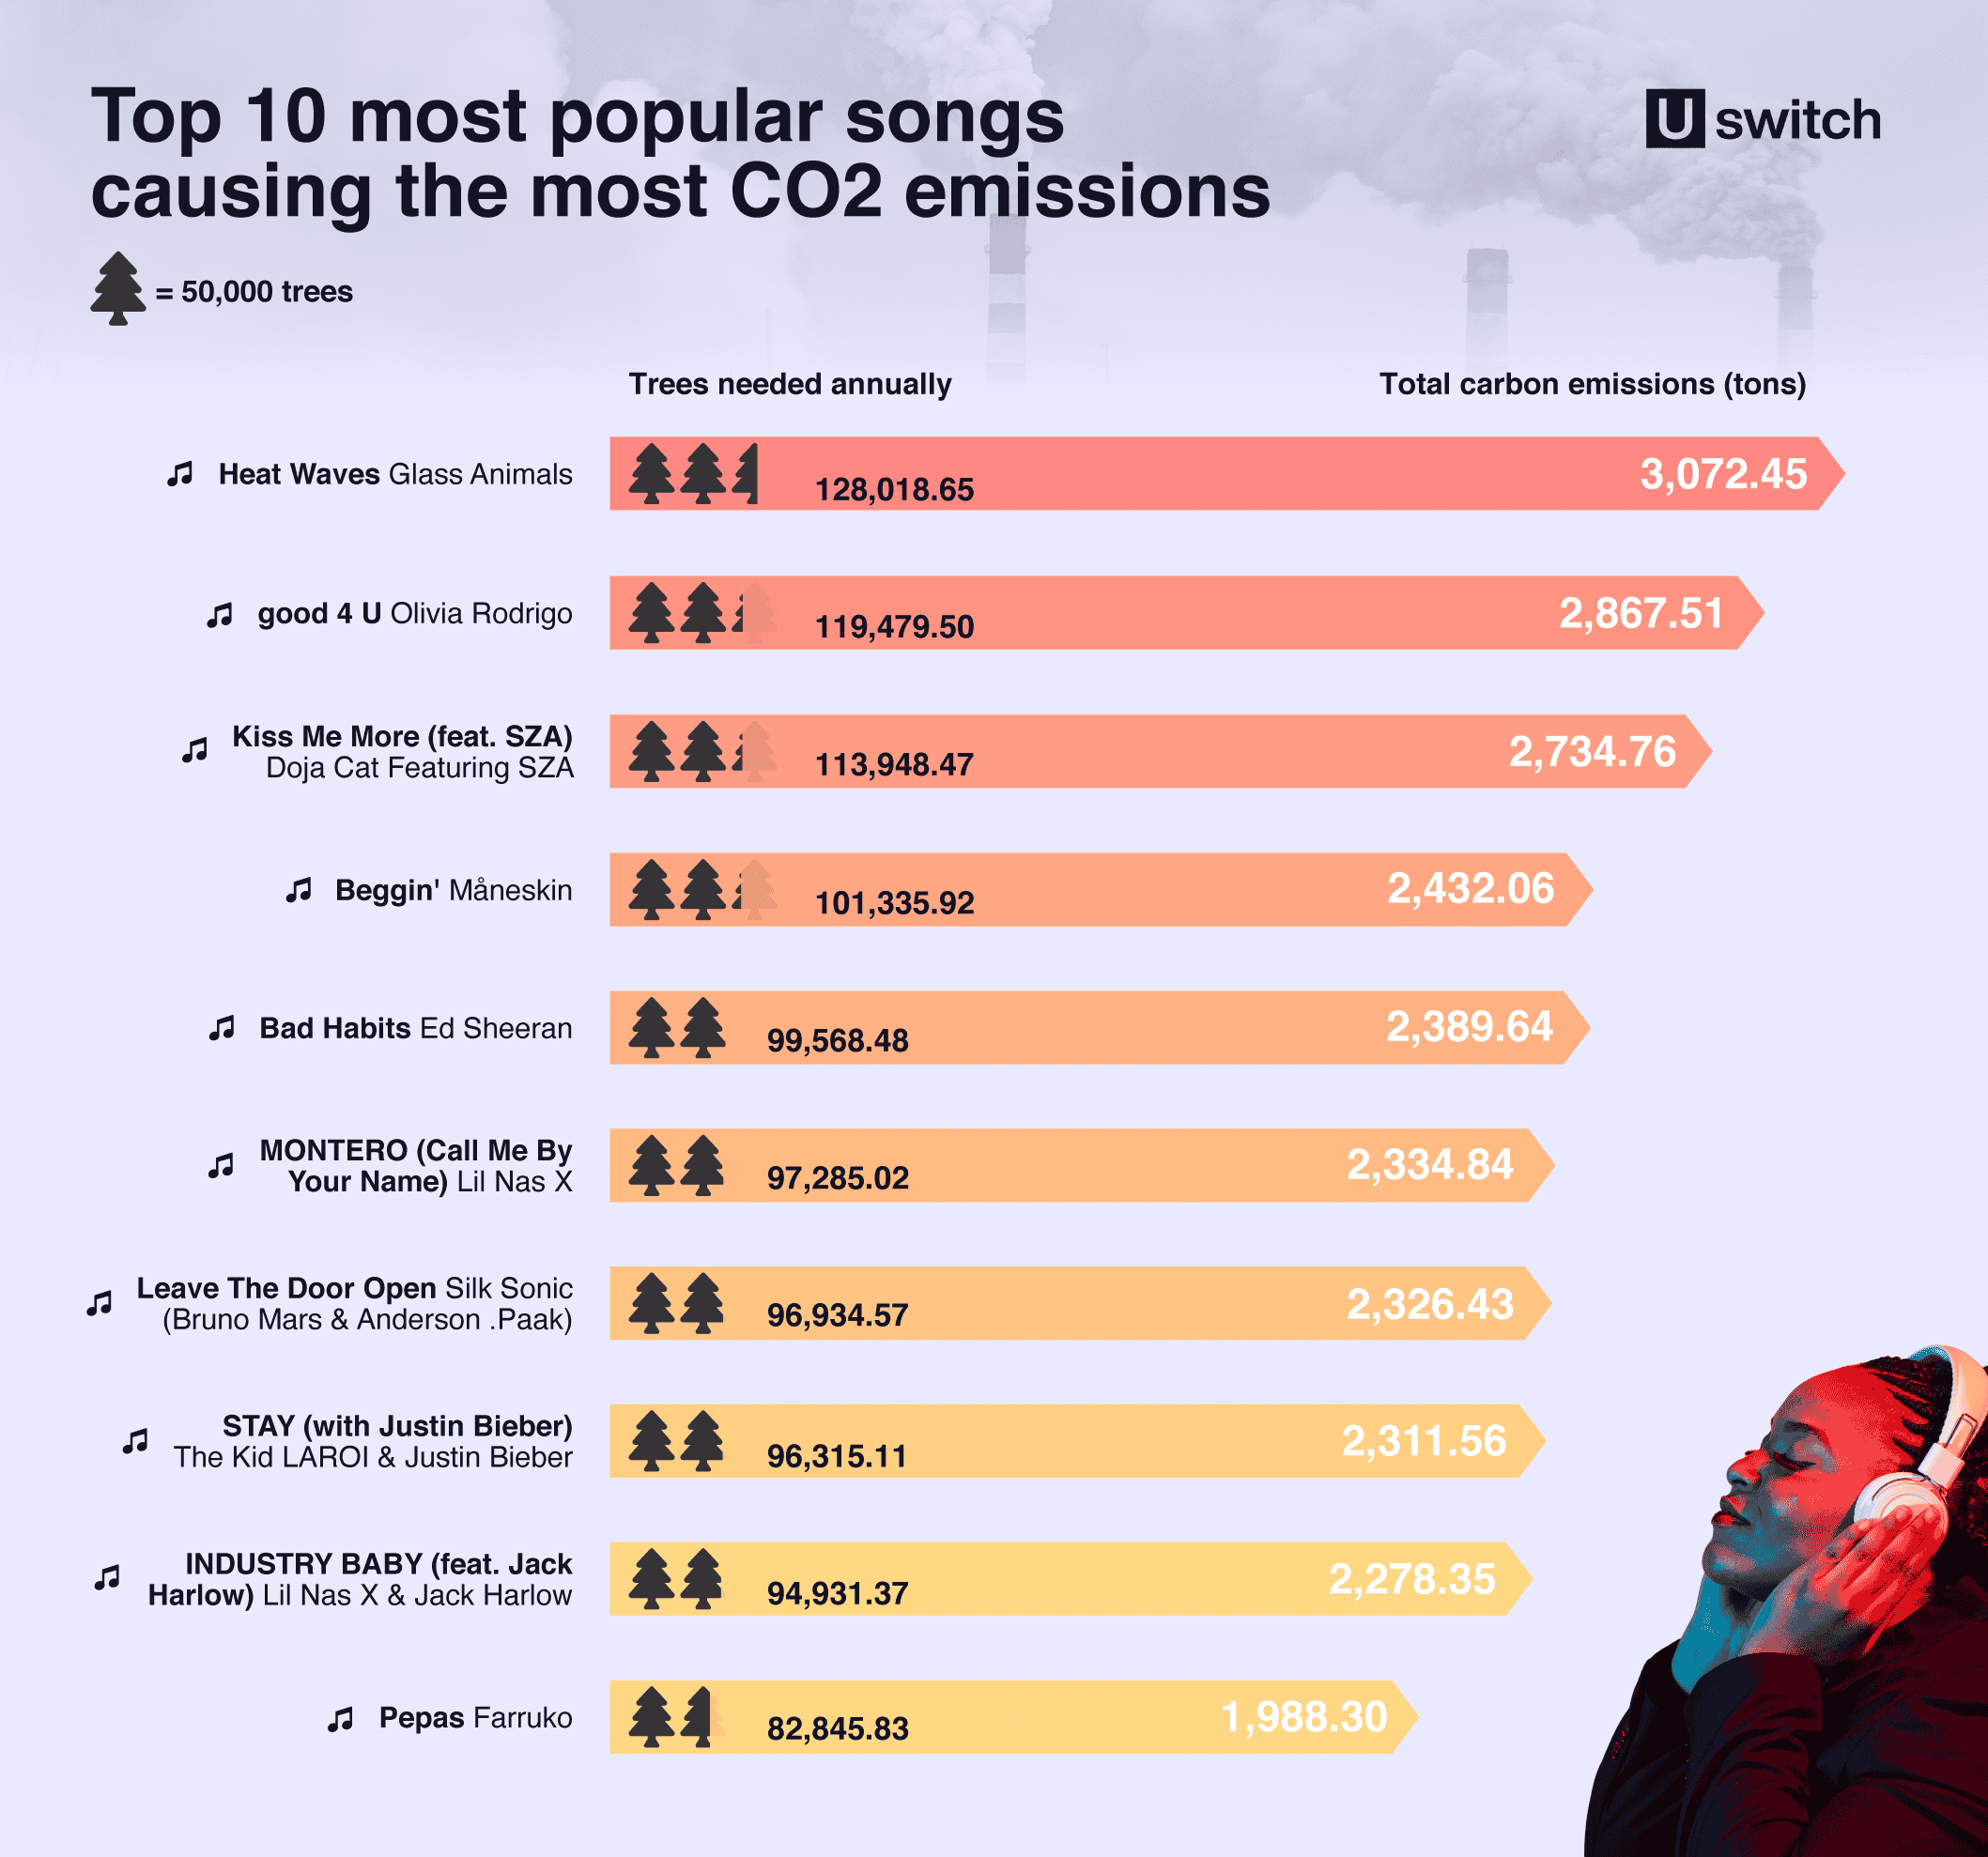 The songs that have caused the most carbon emissions